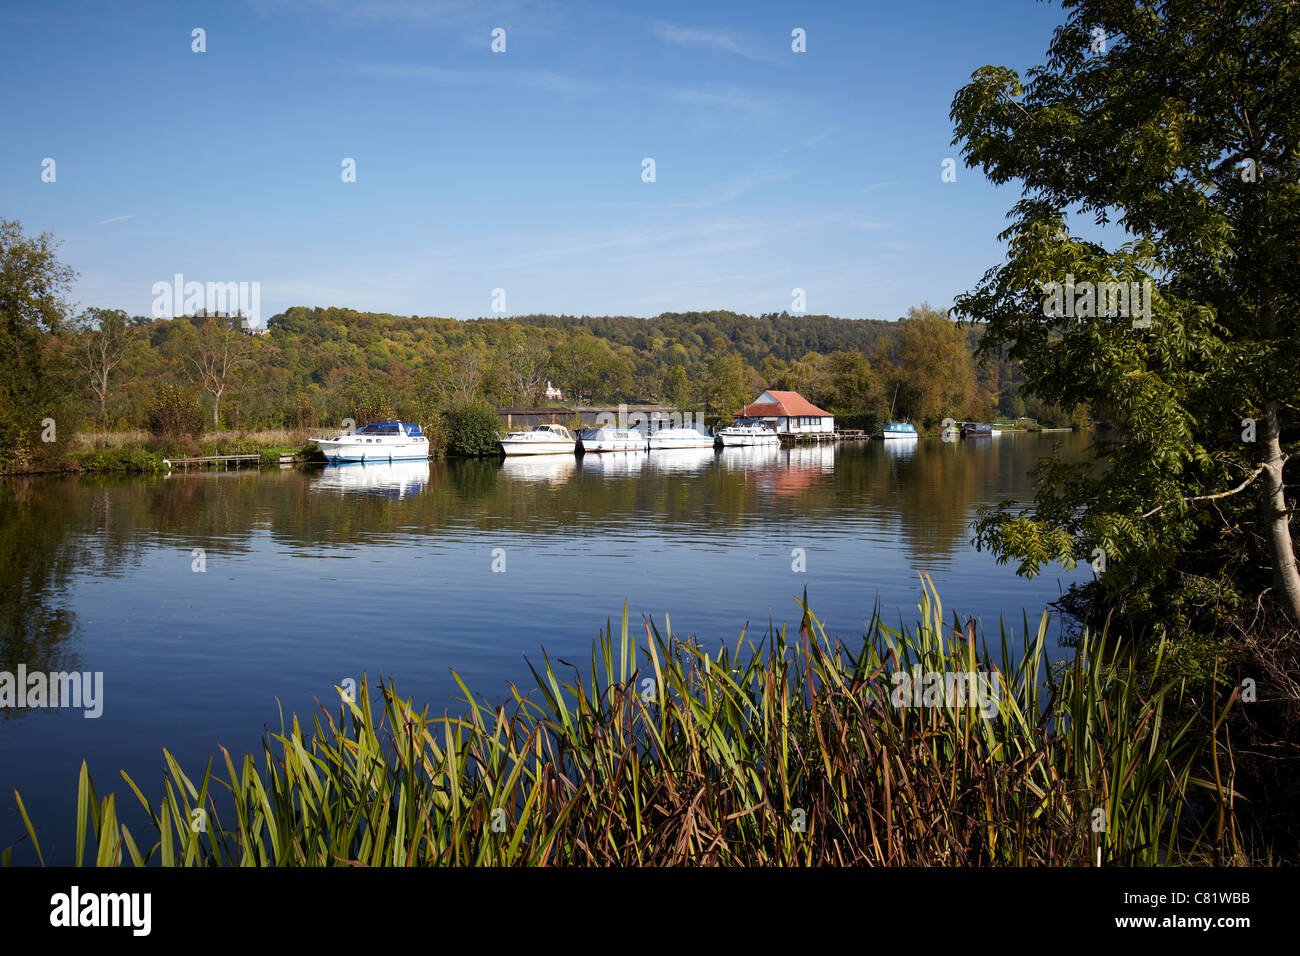 Boats moored alongside the River Thames near to Pangbourne, Reading, Berkshire. Stock Photo